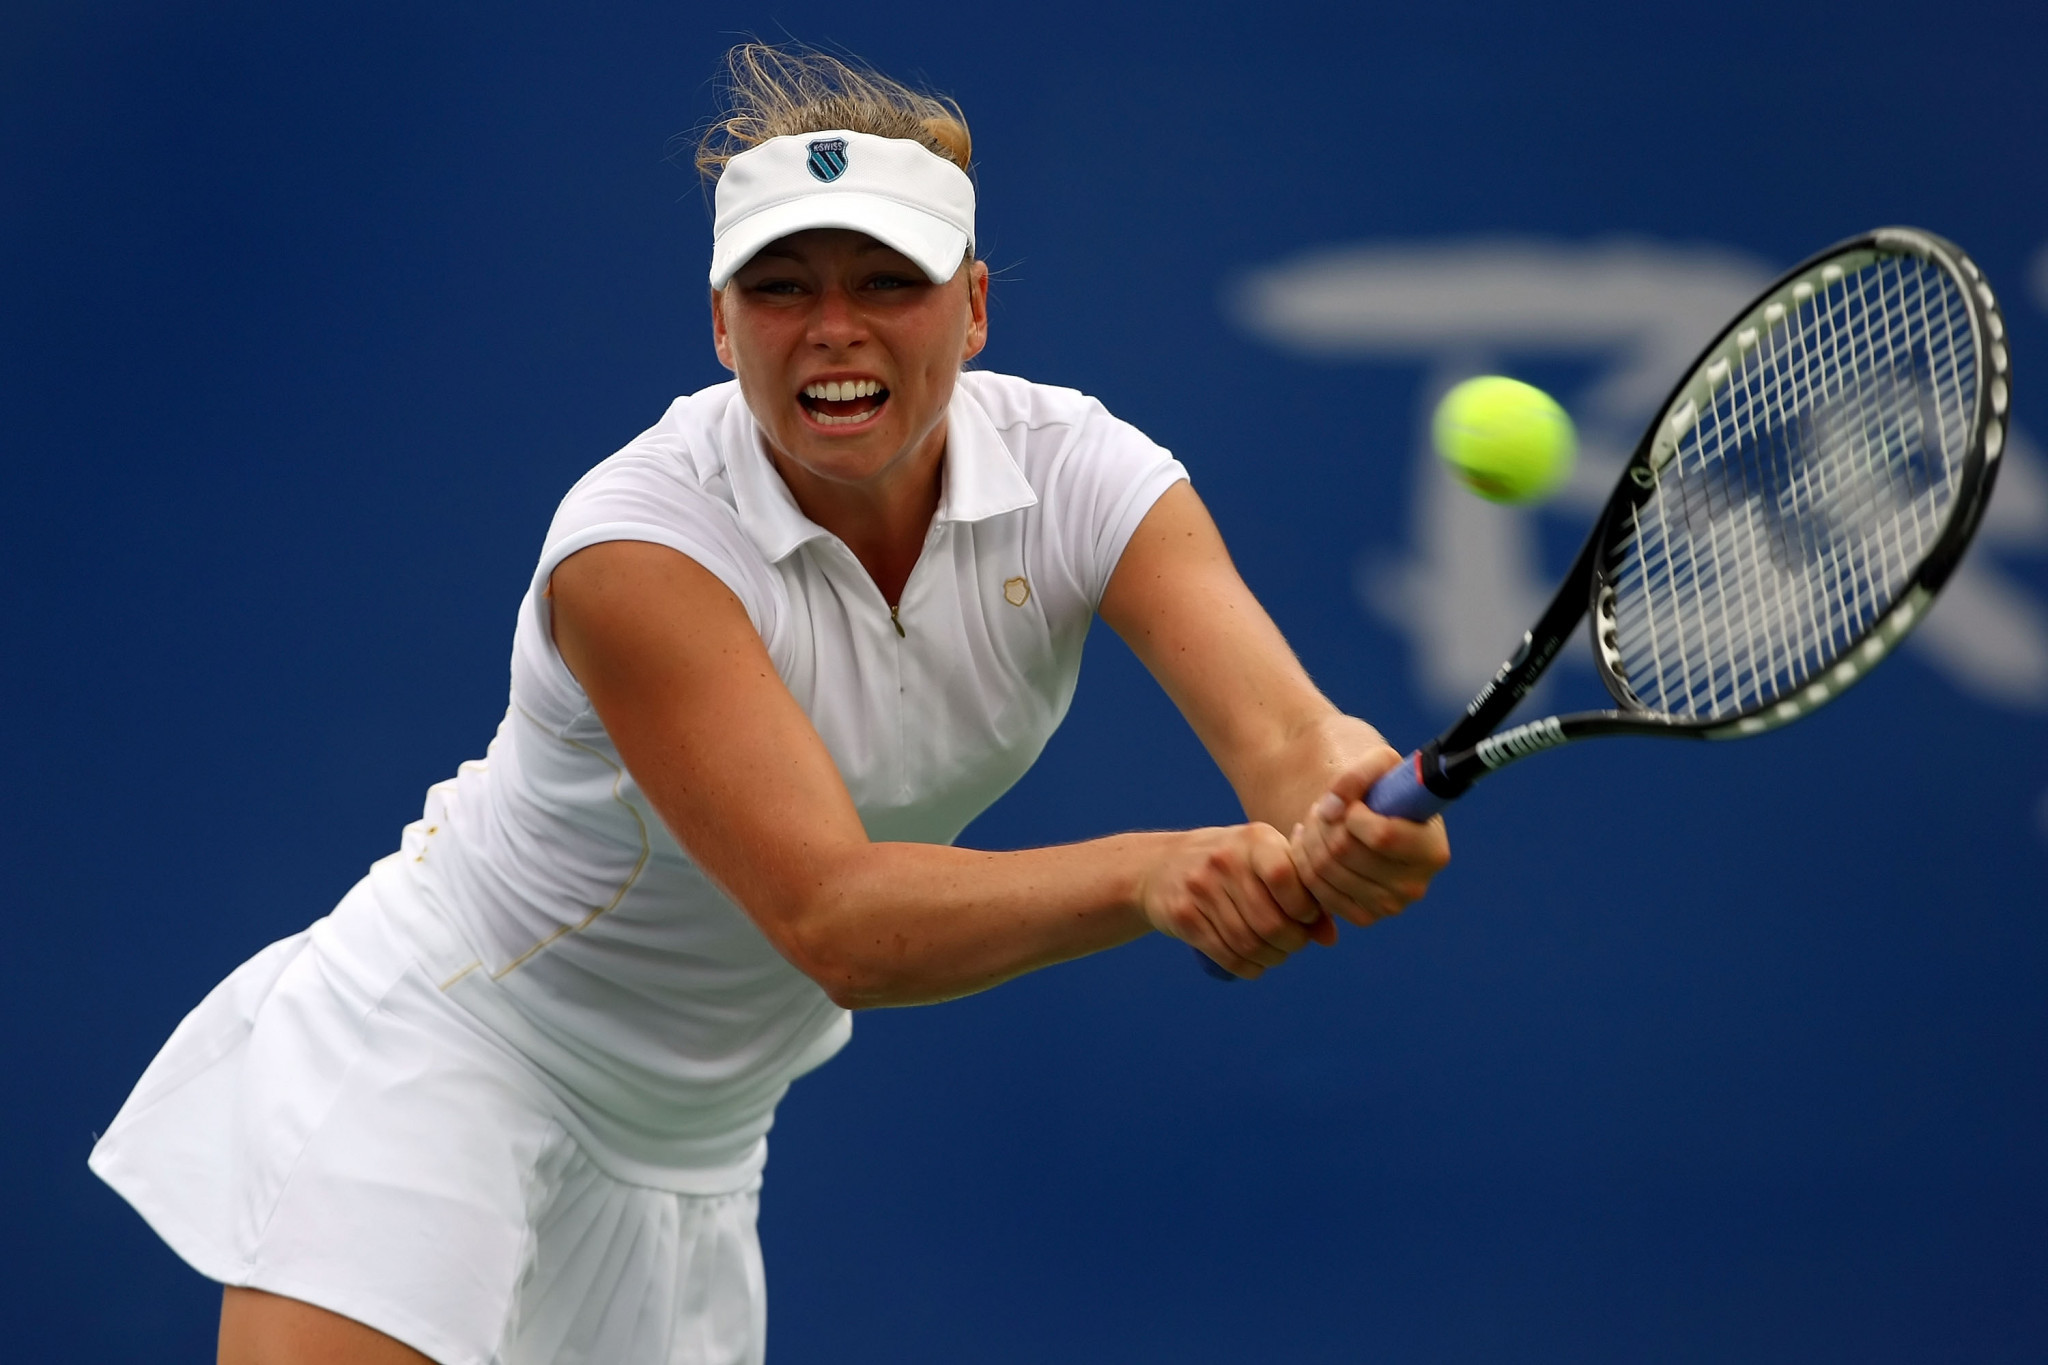 Zvonareva won Olympic singles bronze at Beijing 2008, and has reached Grand Slam finals in both singles and doubles ©Getty Images